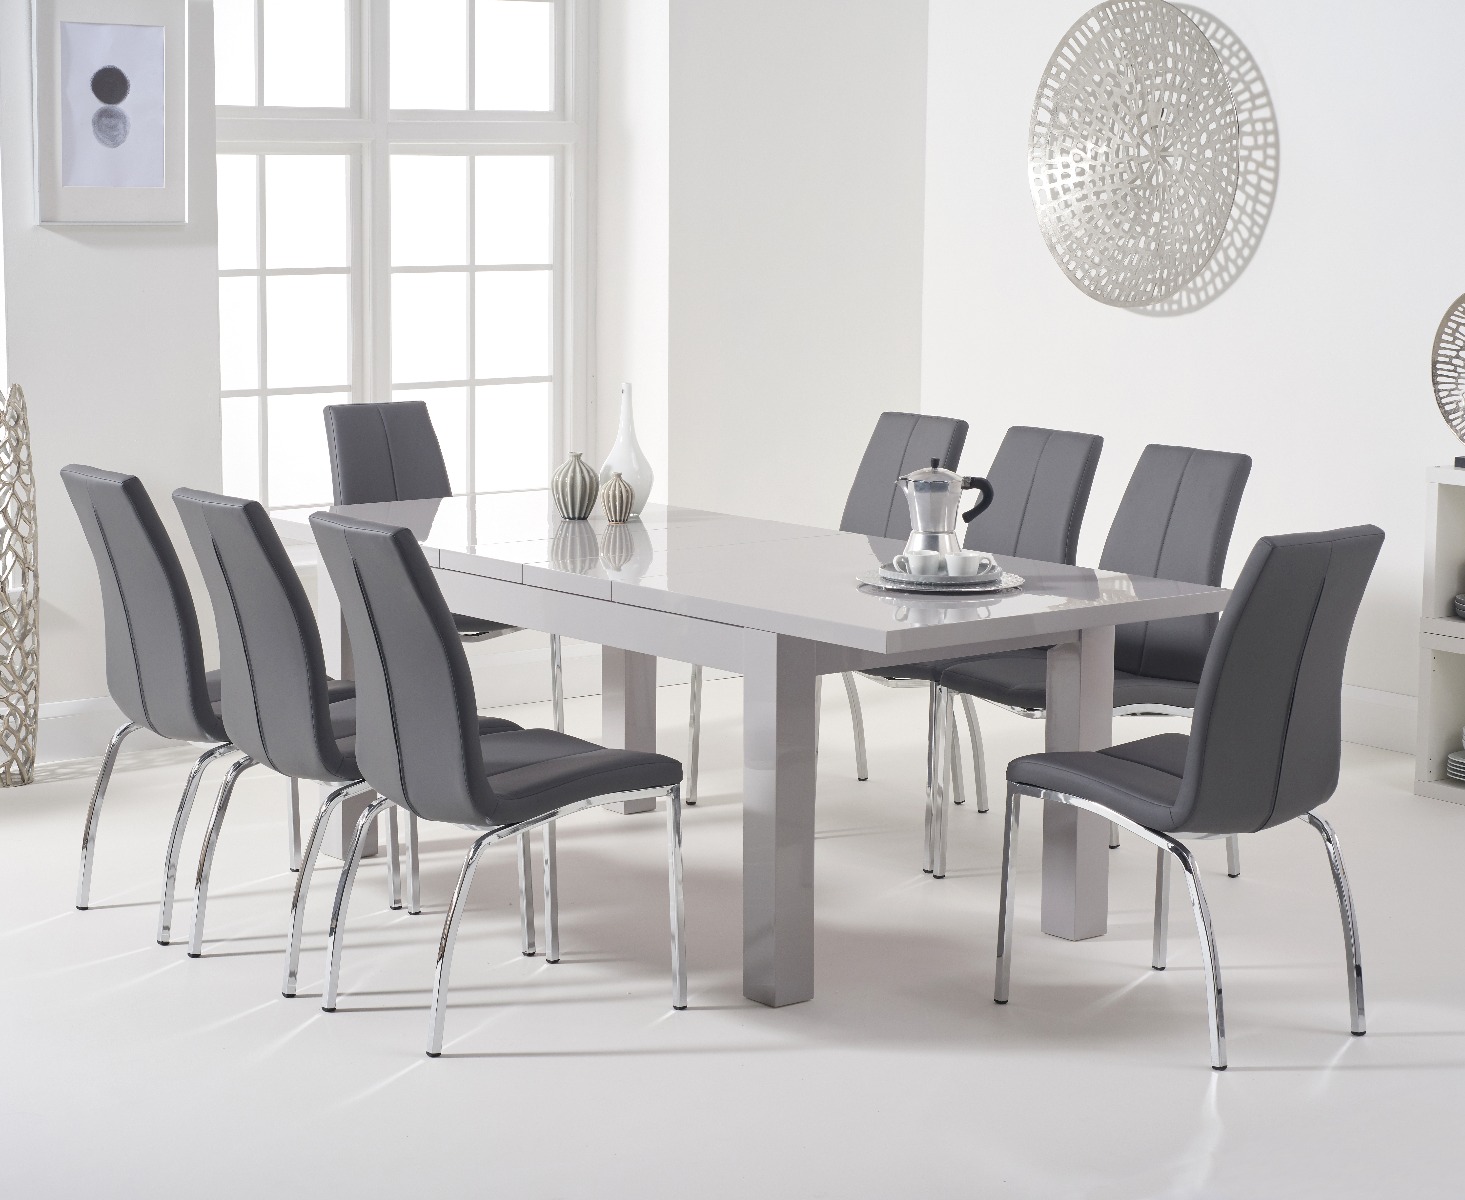 Atlanta Light Grey Gloss 160220cm Extending Dining Table With 10 Black Cavello Chairs